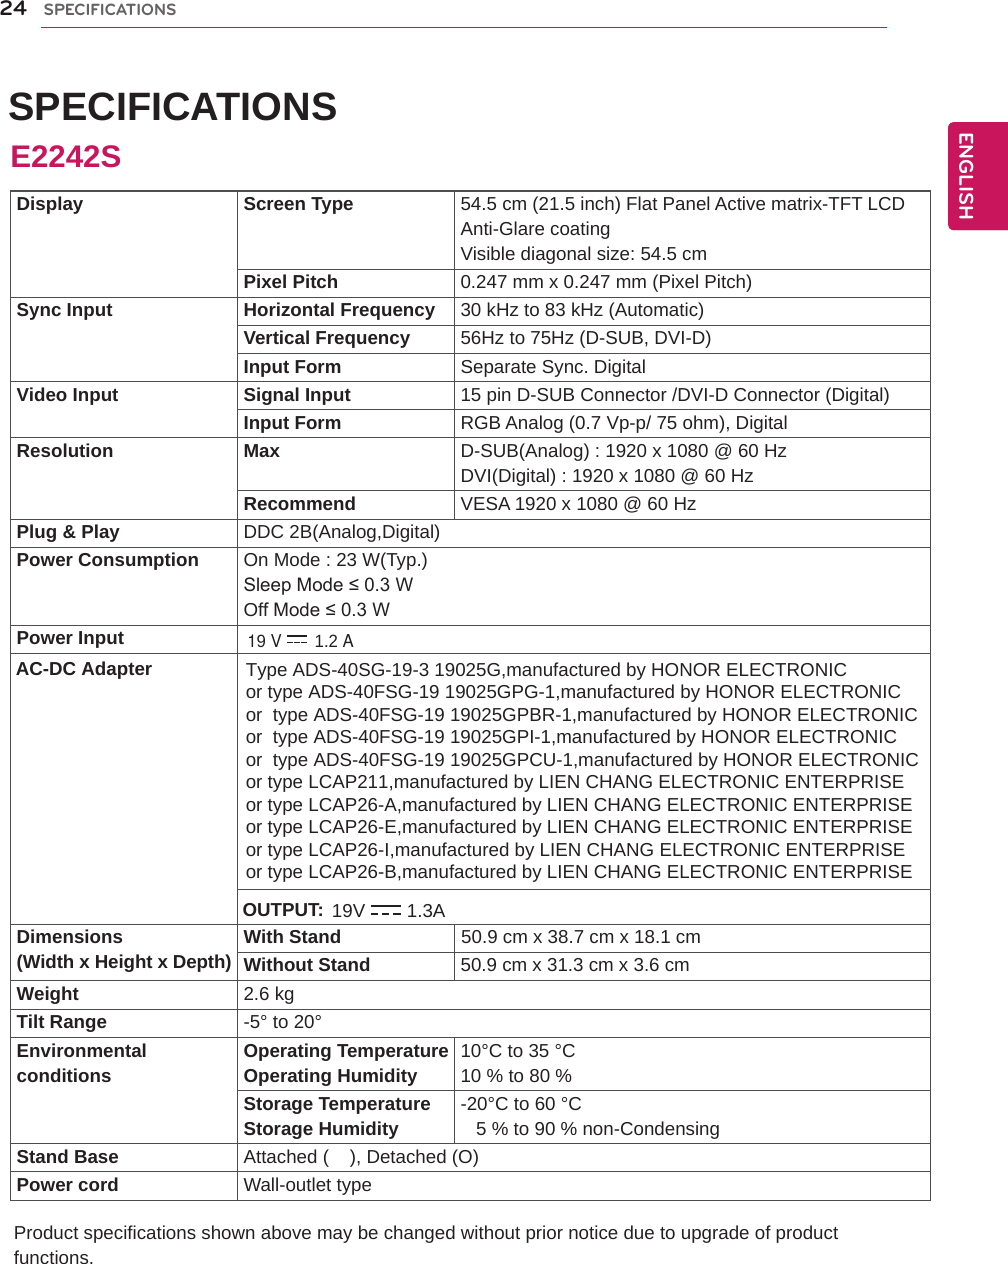 ENGENGLISH SPECIFICATIONS Product specifications shown above may be changed without prior notice due to upgrade of product functions.24SPECIFICATIONSDisplay Screen Type 54.5 cm (21.5 inch) Flat Panel Active matrix-TFT LCDAnti-Glare coatingVisible diagonal size: 54.5 cmPixel Pitch 0.247 mm x 0.247 mm (Pixel Pitch)Sync Input Horizontal Frequency 30 kHz to 83 kHz (Automatic)Vertical Frequency 56Hz to 75Hz (D-SUB, DVI-D)Input Form Separate Sync. DigitalVideo Input Signal Input 15 pin D-SUB Connector /DVI-D Connector (Digital)Input Form RGB Analog (0.7 Vp-p/ 75 ohm), DigitalResolution Max D-SUB(Analog) : 1920 x 1080 @ 60 HzDVI(Digital) : 1920 x 1080 @ 60 HzRecommend VESA 1920 x 1080 @ 60 HzPlug &amp; Play DDC 2B(Analog,Digital)Power Consumption On Mode : 23 W(Typ.)Sleep Mode ≤ 0.3 W Off Mode ≤ 0.3 W Power InputDimensions(Width x Height x Depth) With Stand                       50.9 cm x 38.7 cm x 18.1 cmWithout Stand 50.9 cm x 31.3 cm x 3.6 cmWeight 2.6 kgTilt Range -5° to 20°Environmentalconditions Operating TemperatureOperating Humidity 10°C to 35 °C10 % to 80 % Storage TemperatureStorage Humidity -20°C to 60 °C   5 % to 90 % non-CondensingStand Base Attached (    ), Detached (O)Power cord Wall-outlet typeE2242S19 V 1.2 A AC-DC Adapter Type ADS-40SG-19-3 19025G,manufactured by HONOR ELECTRONICor type ADS-40FSG-19 19025GPG-1,manufactured by HONOR ELECTRONICor  type ADS-40FSG-19 19025GPBR-1,manufactured by HONOR ELECTRONICor  type ADS-40FSG-19 19025GPI-1,manufactured by HONOR ELECTRONICor  type ADS-40FSG-19 19025GPCU-1,manufactured by HONOR ELECTRONICor type LCAP211,manufactured by LIEN CHANG ELECTRONIC ENTERPRISEor type LCAP26-A,manufactured by LIEN CHANG ELECTRONIC ENTERPRISEor type LCAP26-E,manufactured by LIEN CHANG ELECTRONIC ENTERPRISEor type LCAP26-I,manufactured by LIEN CHANG ELECTRONIC ENTERPRISEor type LCAP26-B,manufactured by LIEN CHANG ELECTRONIC ENTERPRISE OUTPUT: 19V 1.3A